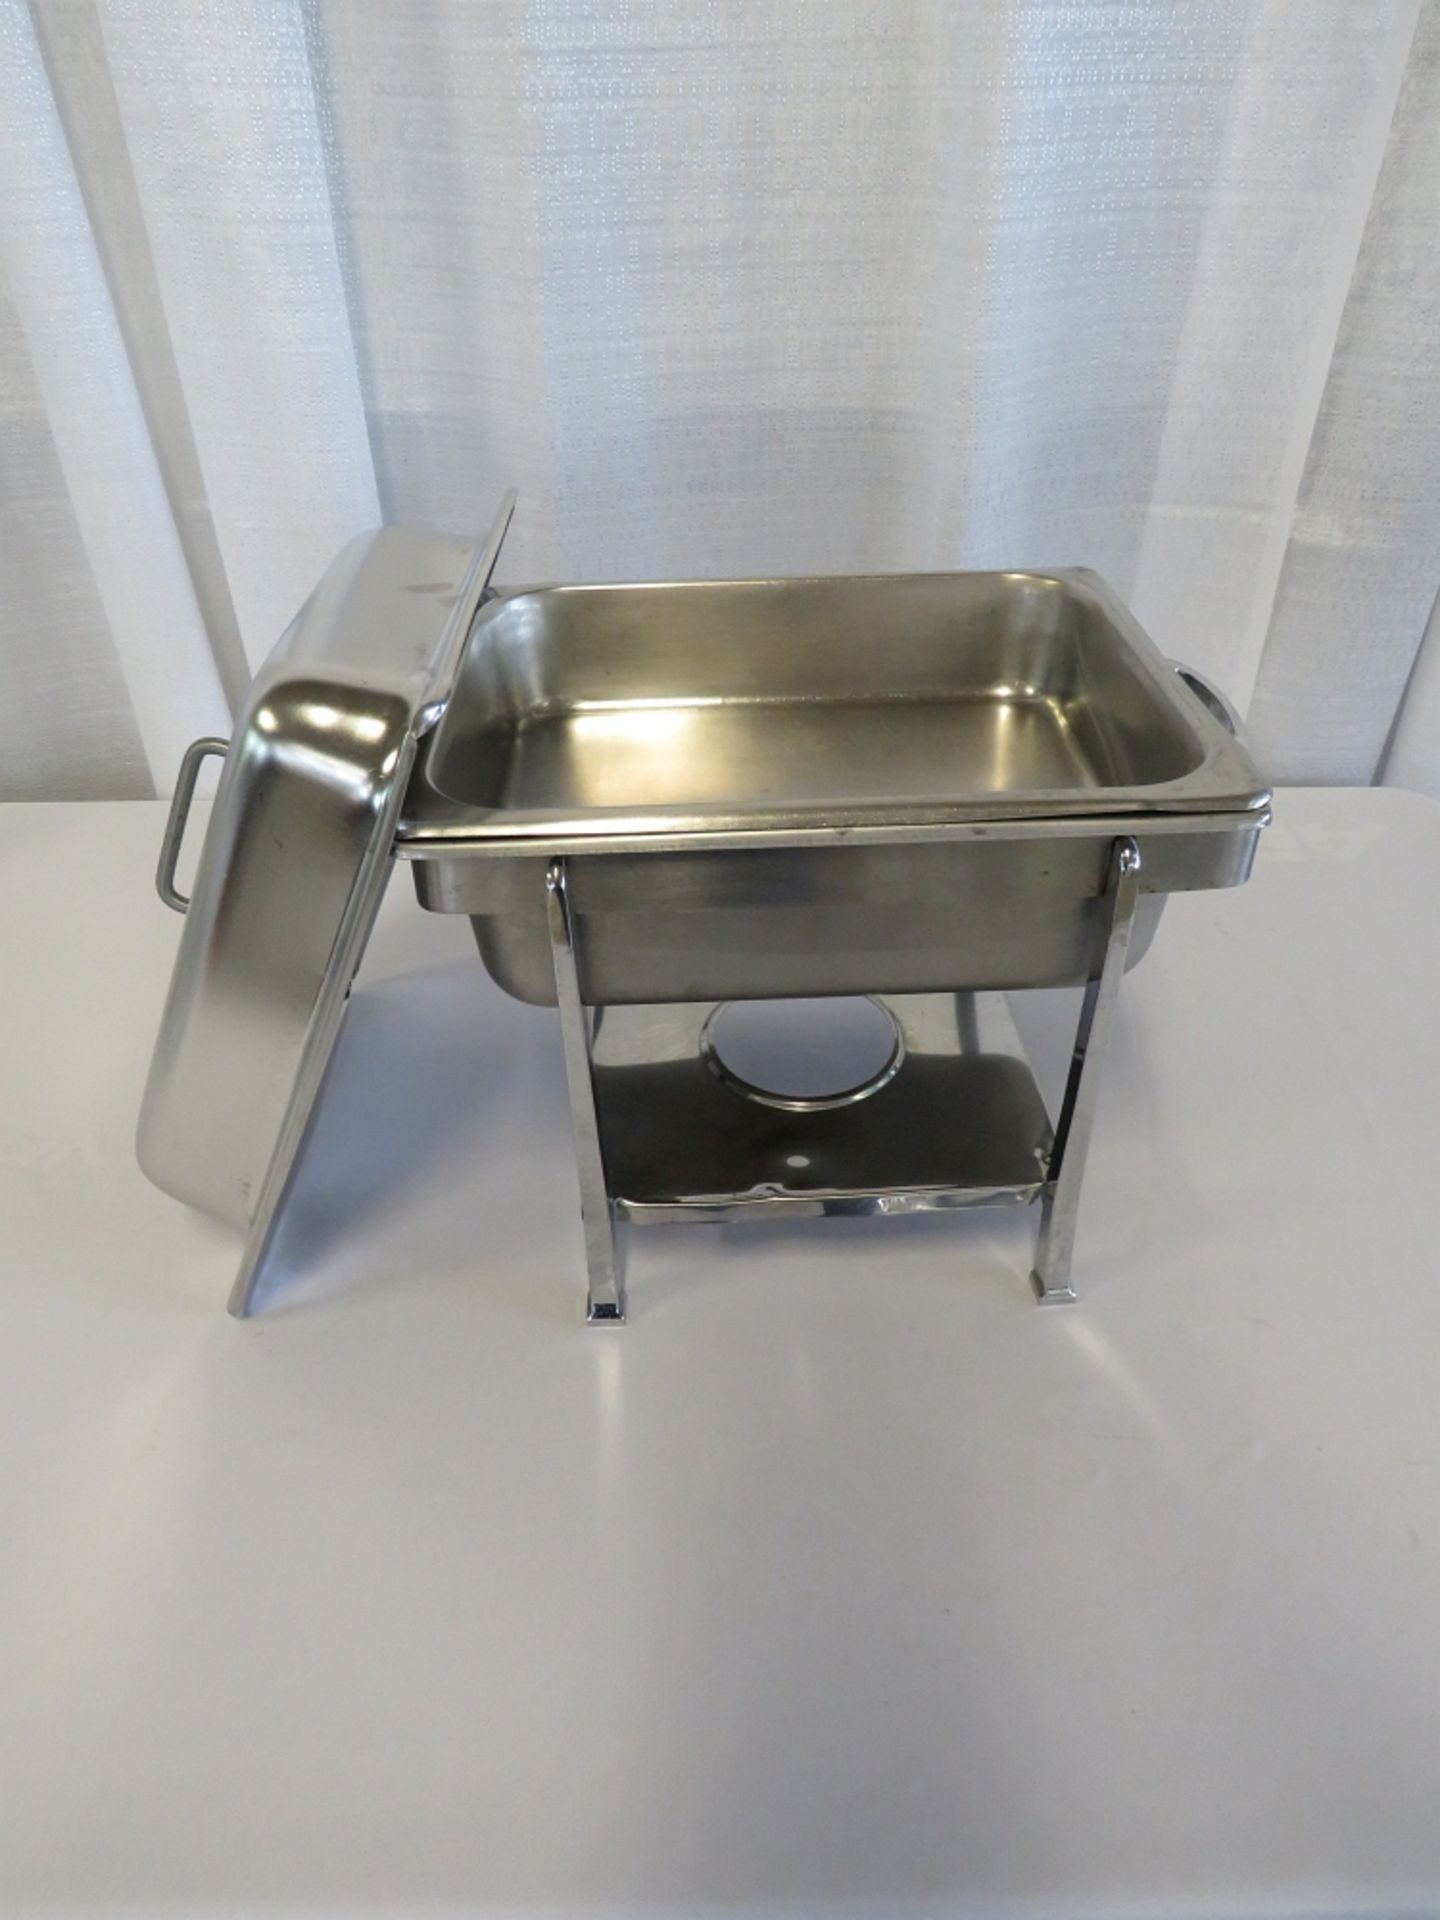 Stainless 4 Qt. Chafer - Image 2 of 2